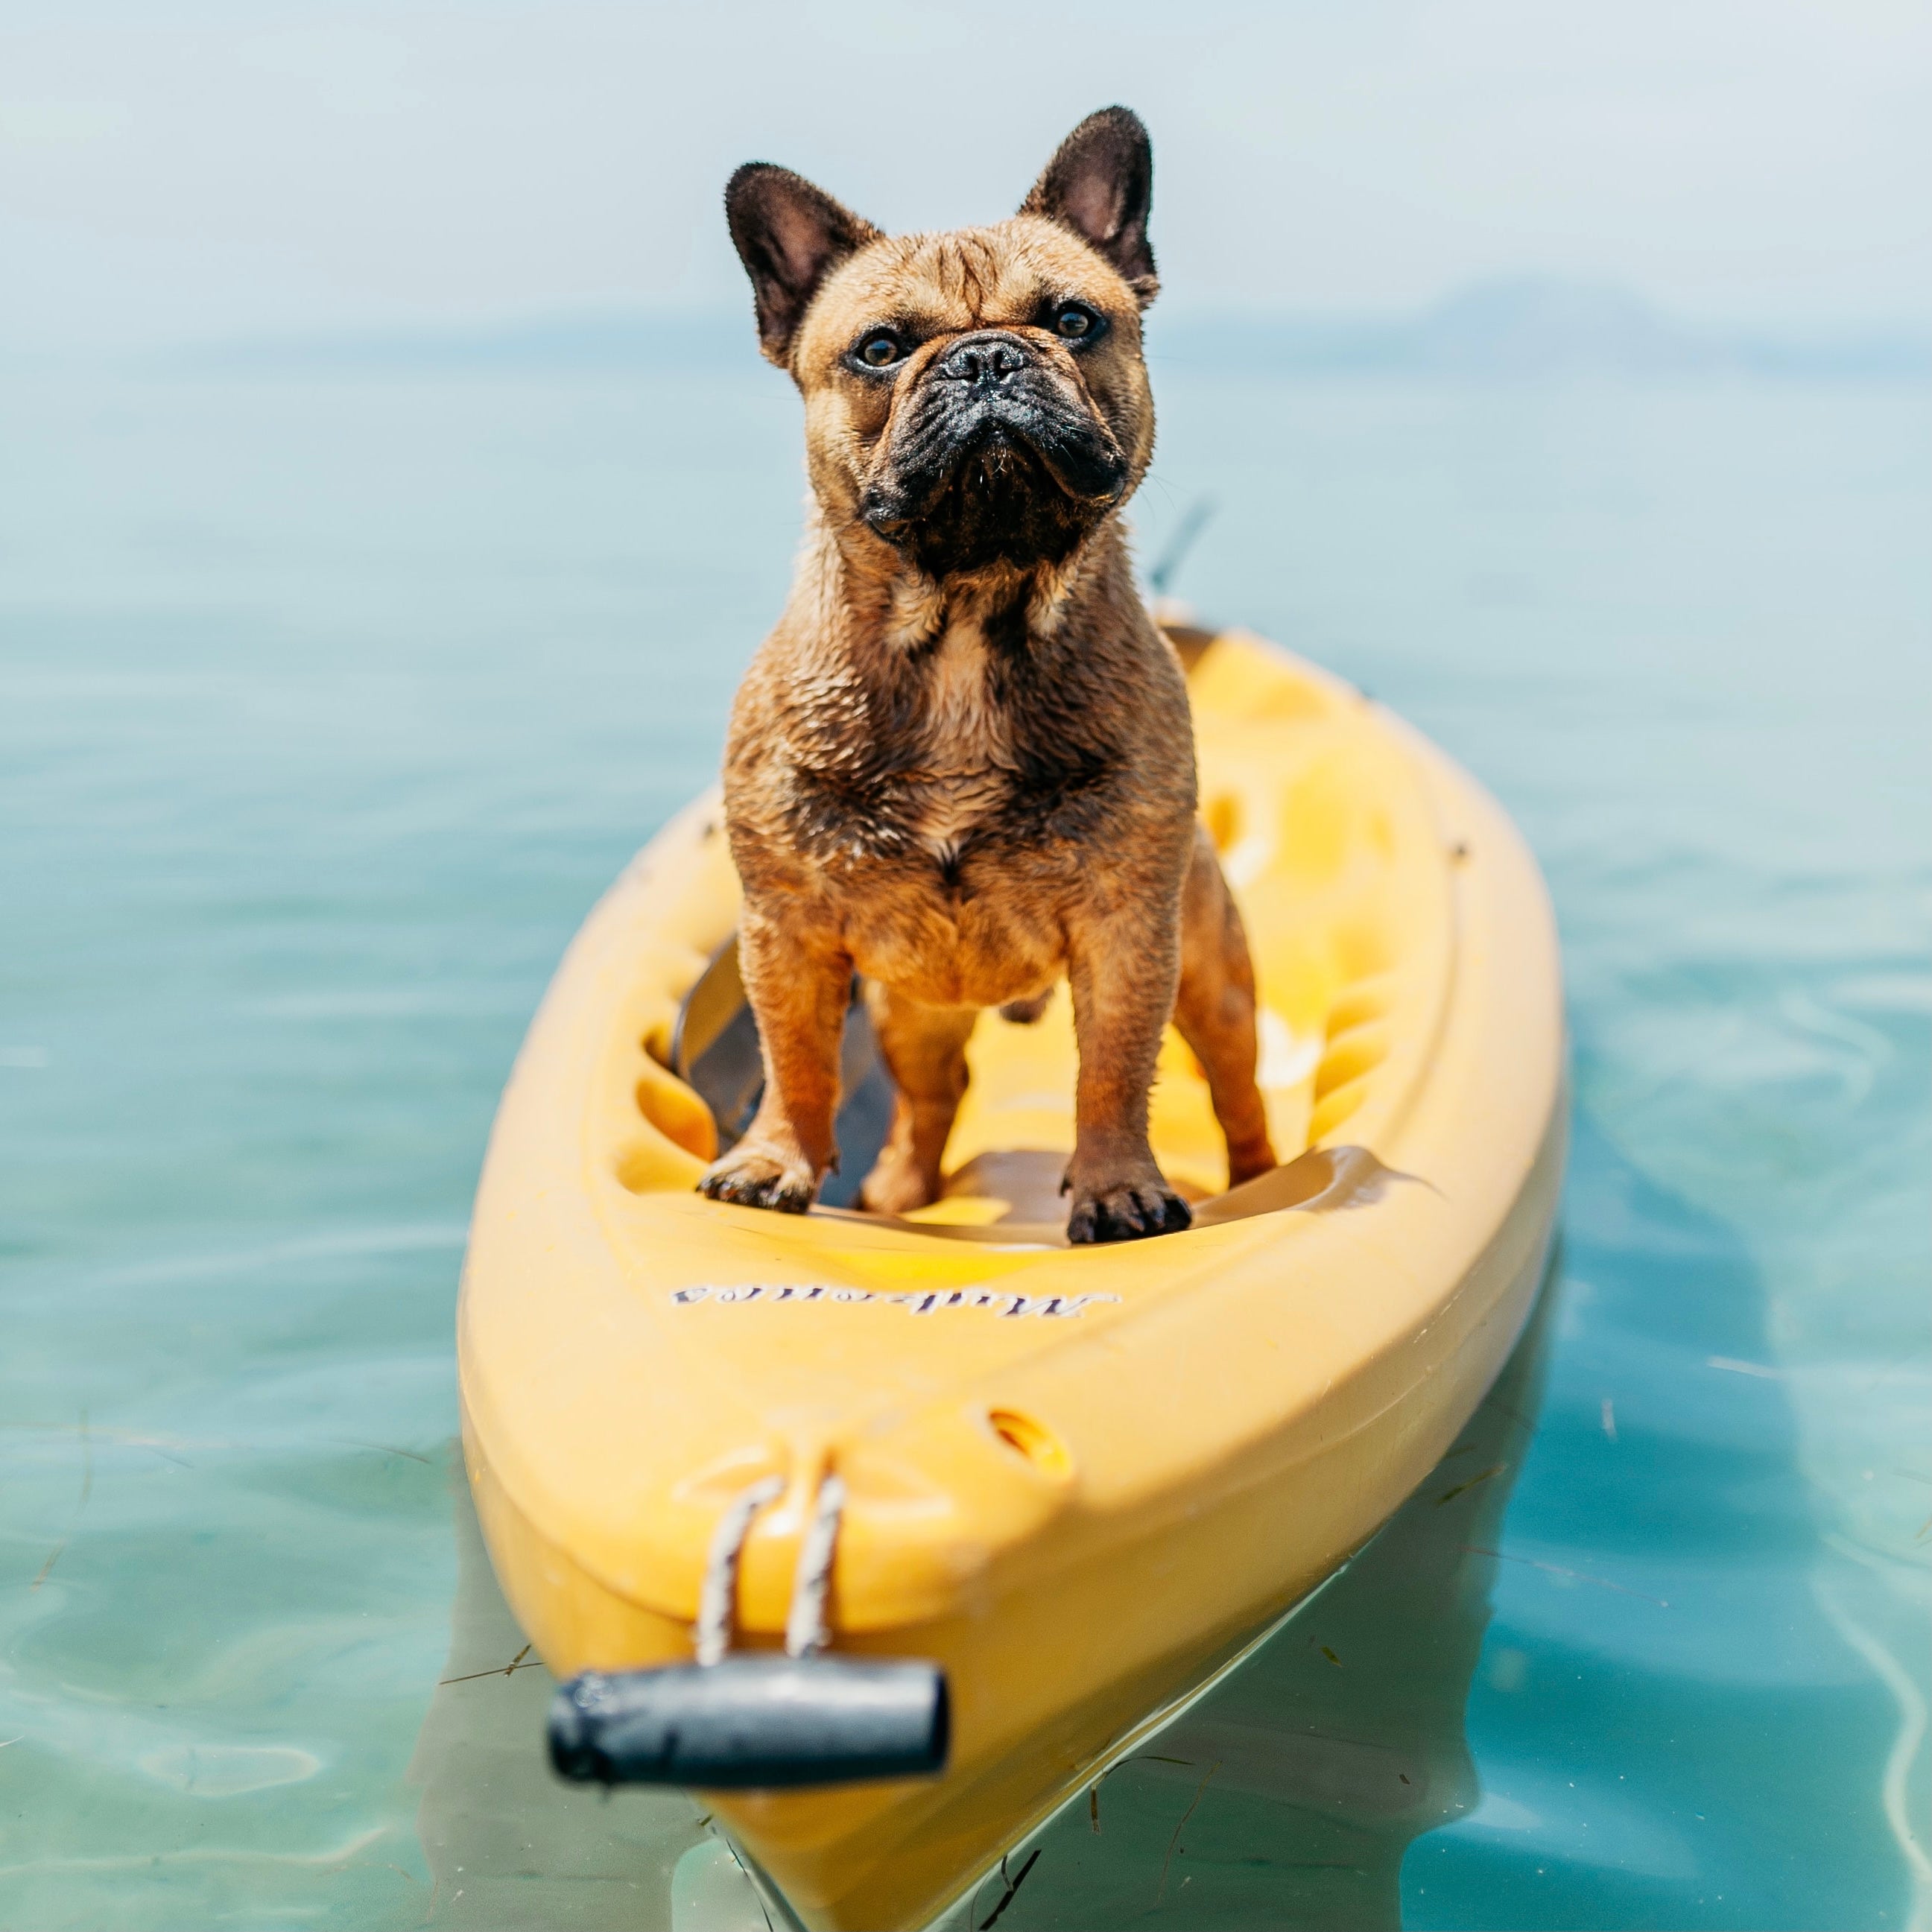 Dog summer tips | How To Keep Your Dog Cool In Summer - 10 Easy Tips